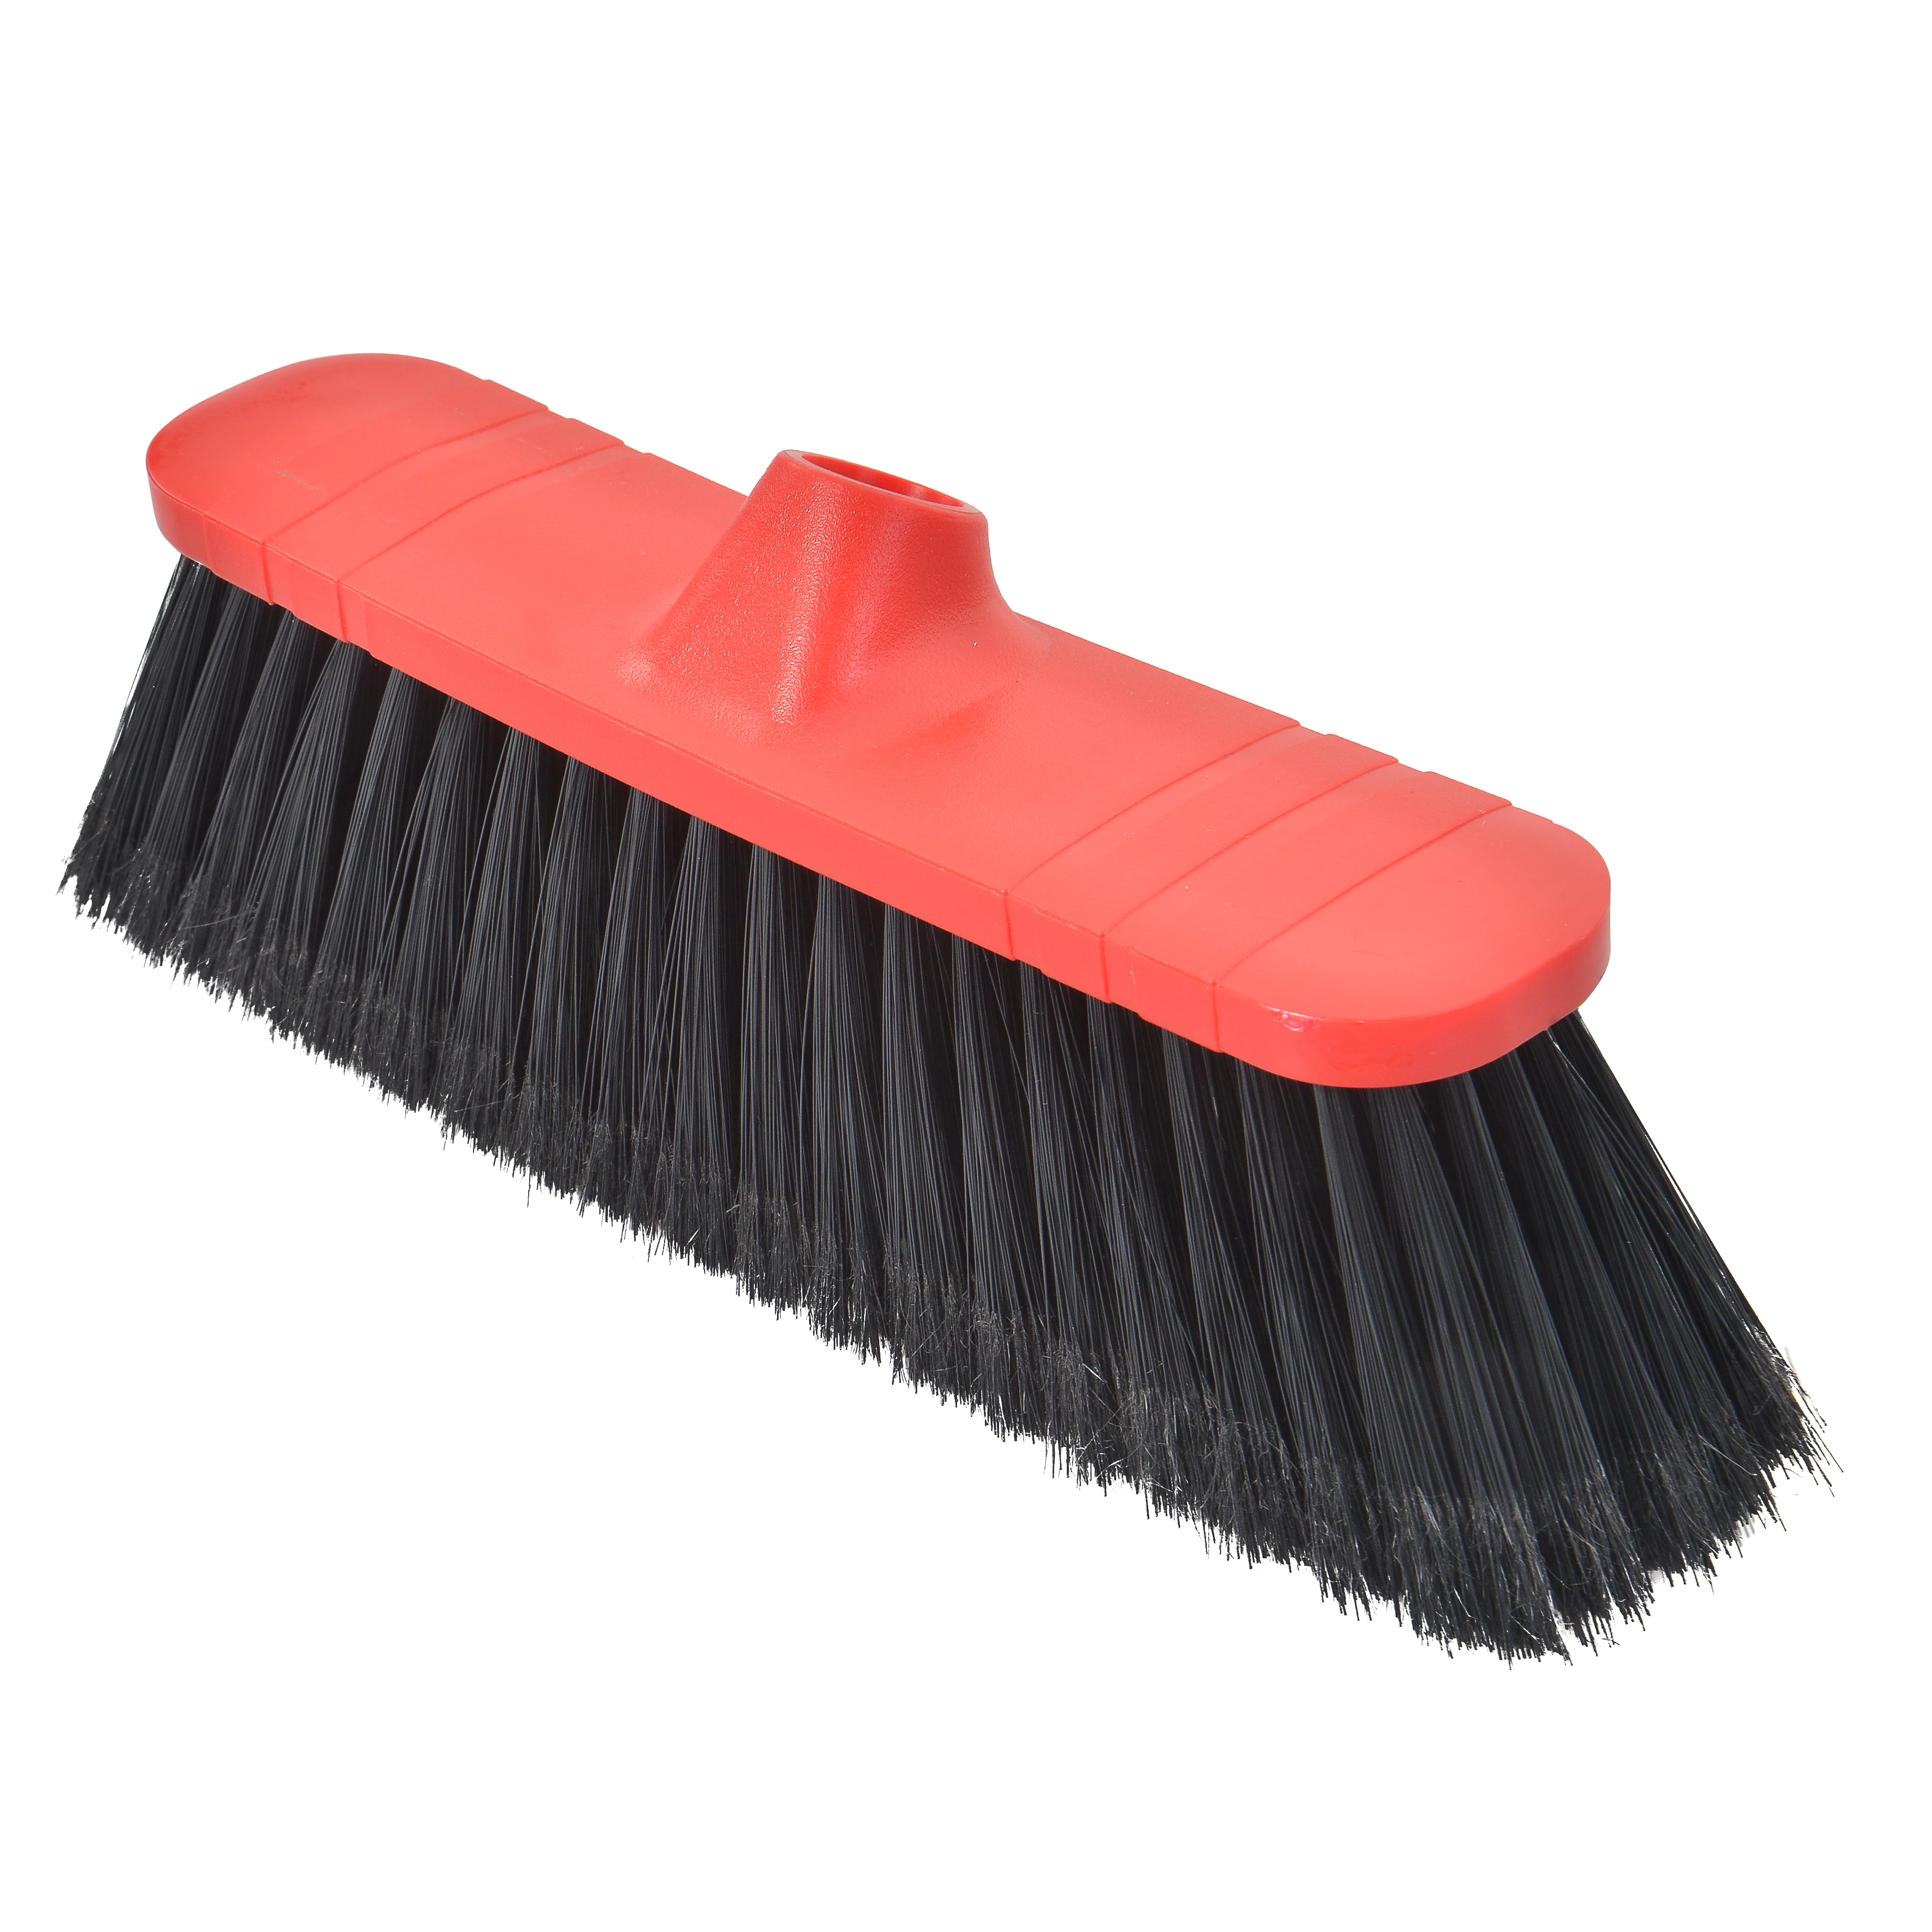 Corner Super Large Wide Angle Broom, Easy Assembly Great Use for Home Kitchen Room Office Lobby Floor Pet Hair Sweeping (1600140860911)